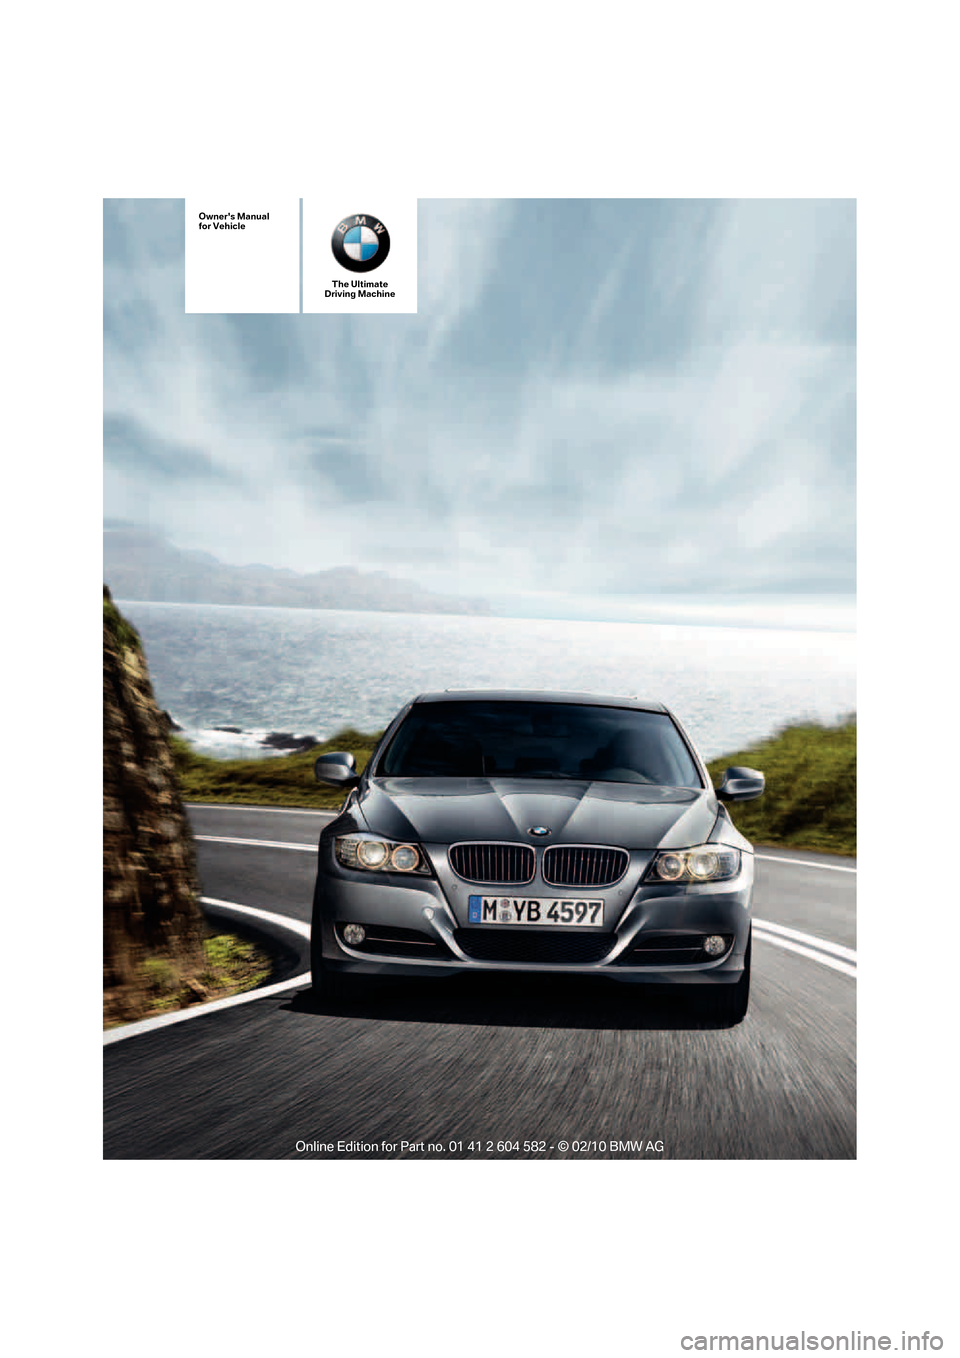 BMW 323I TOURING 2011 E91 Owners Manual The Ultimate
Driving Machine
Owners Manual
for Vehicle 